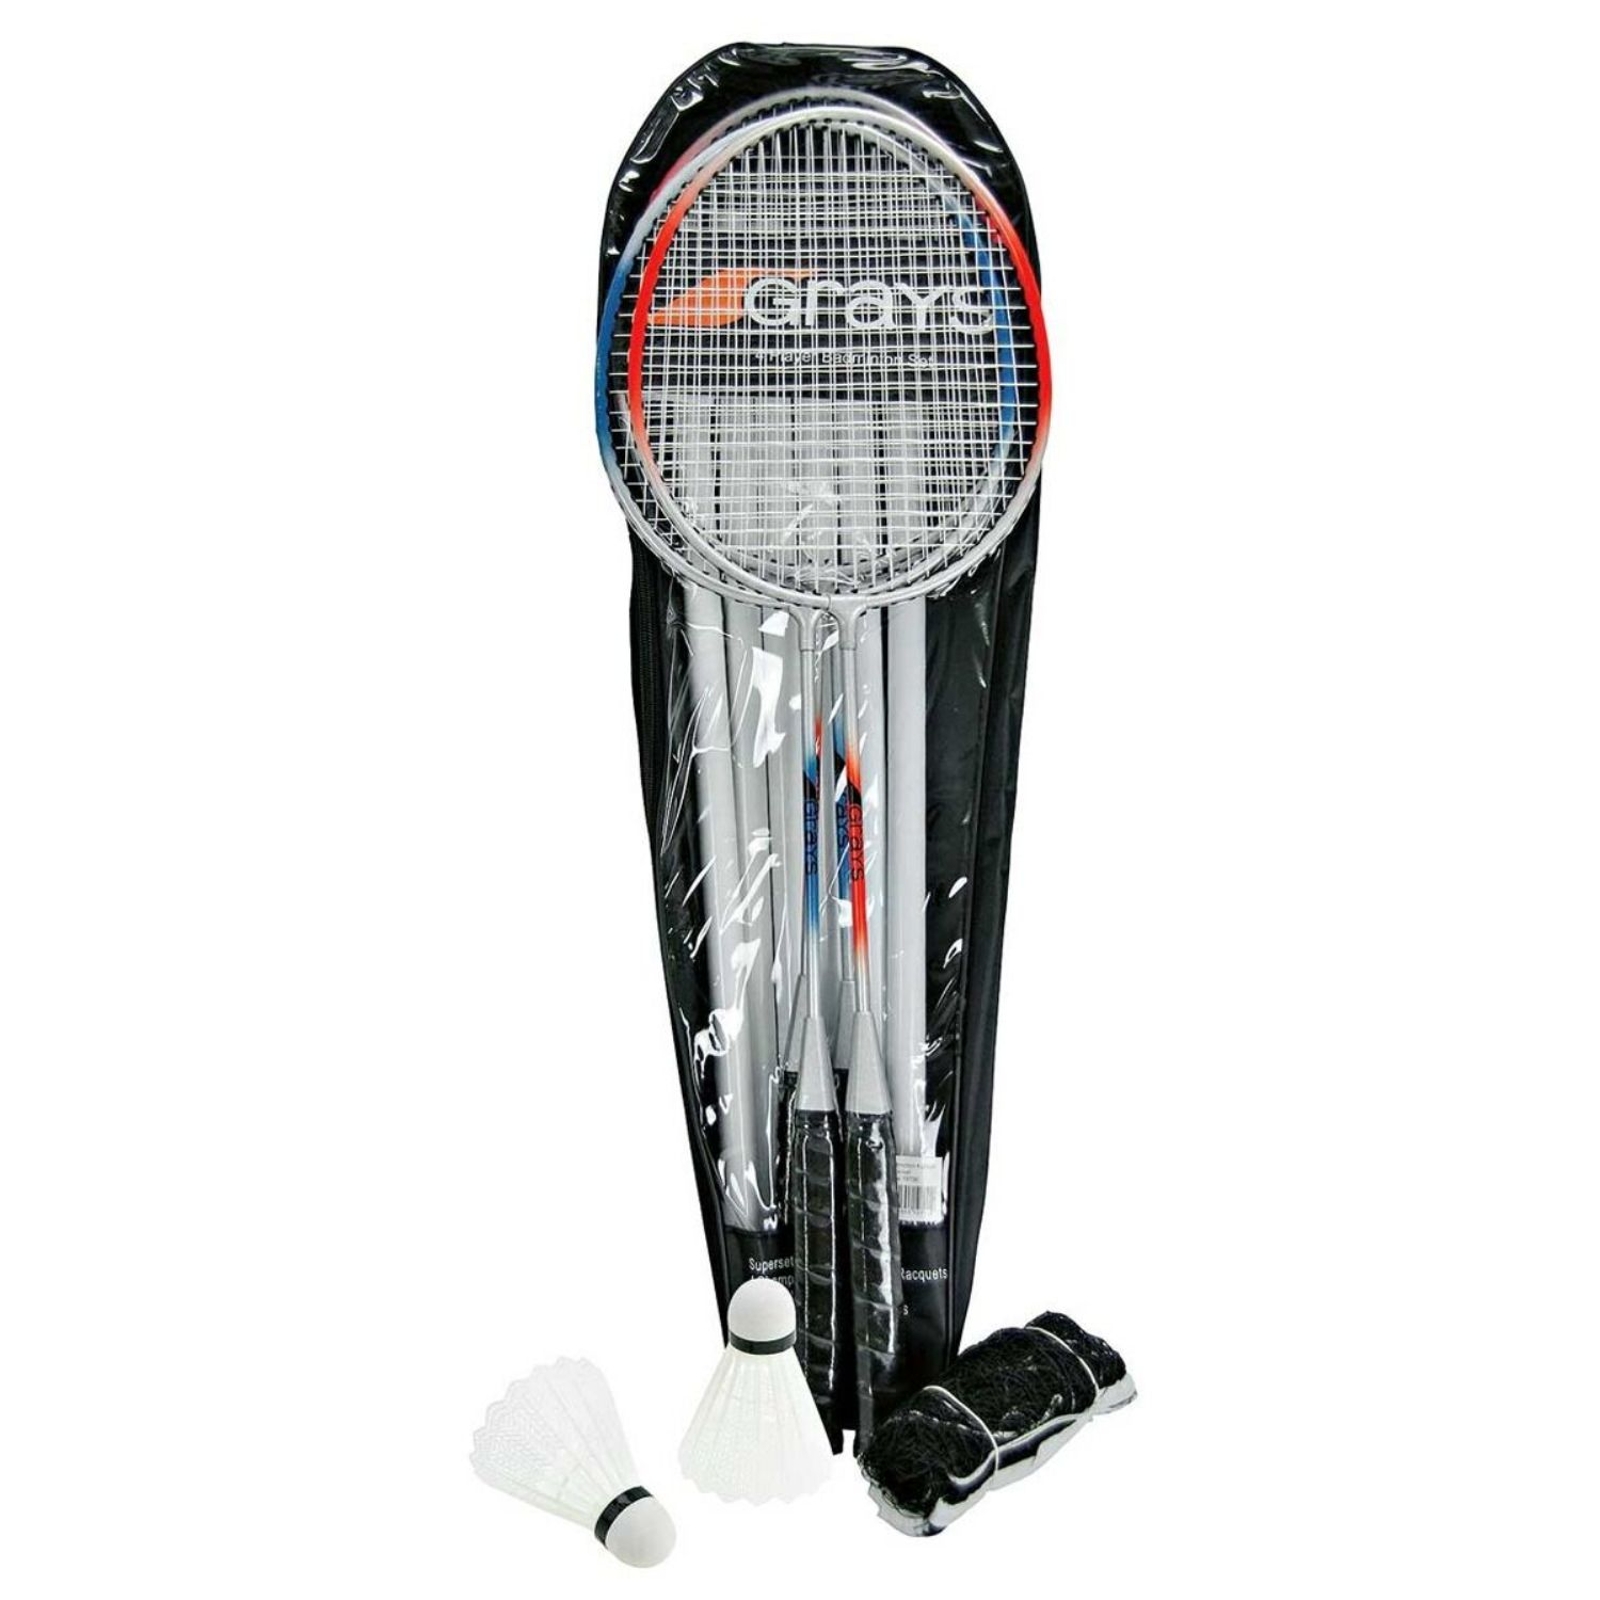 Free Delivery Aus Wide Grays 4 Player Badminton Set 